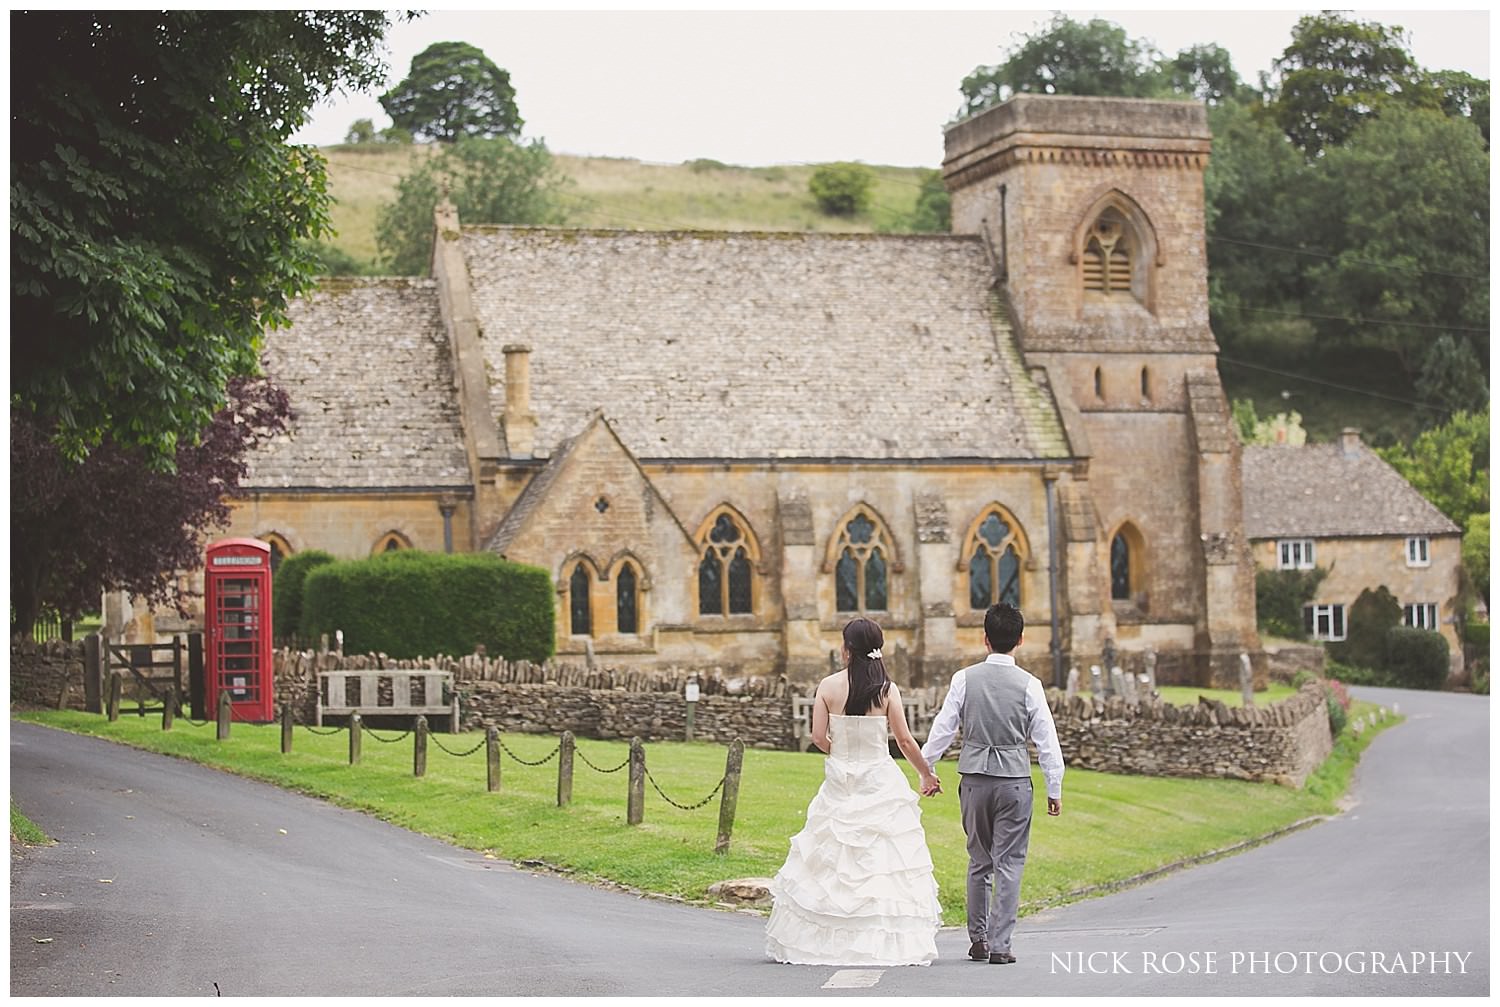  Pre wedding photograph of a couple walking towards and church and red phone box in the cotswolds 